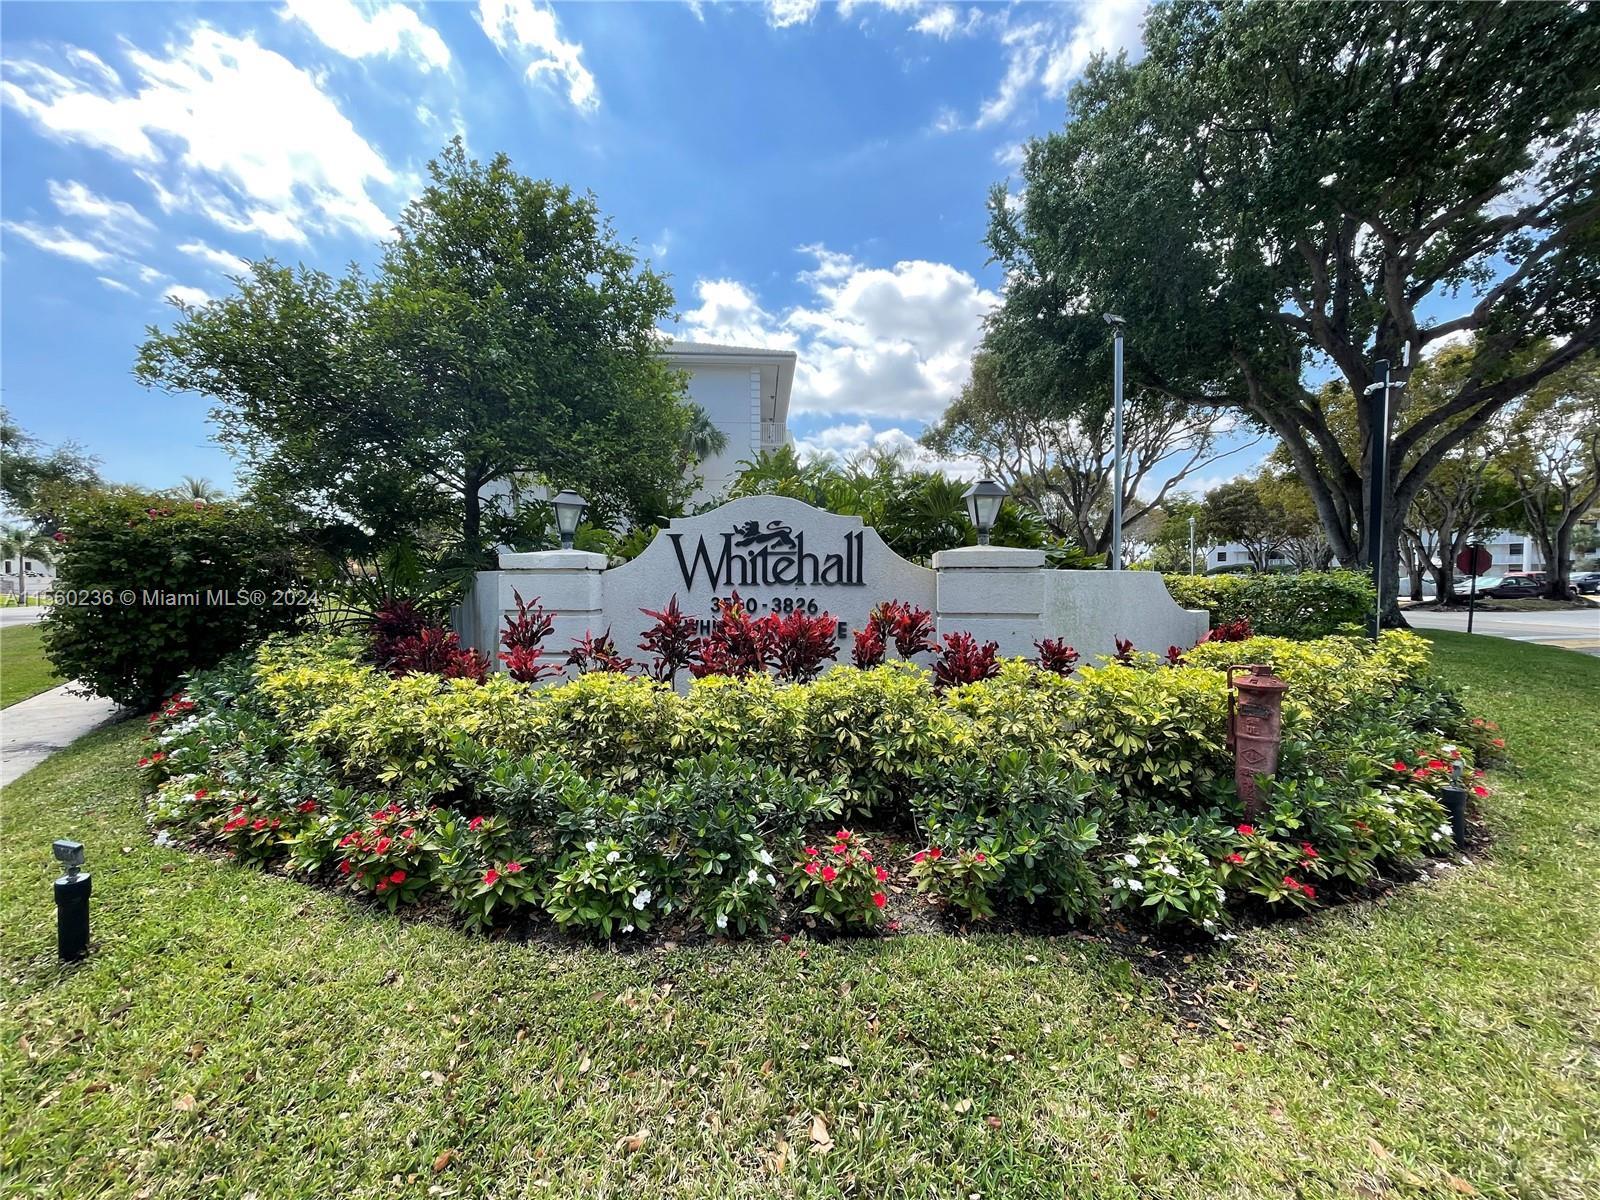 Photo of 3650 Whitehall Dr #305 in West Palm Beach, FL